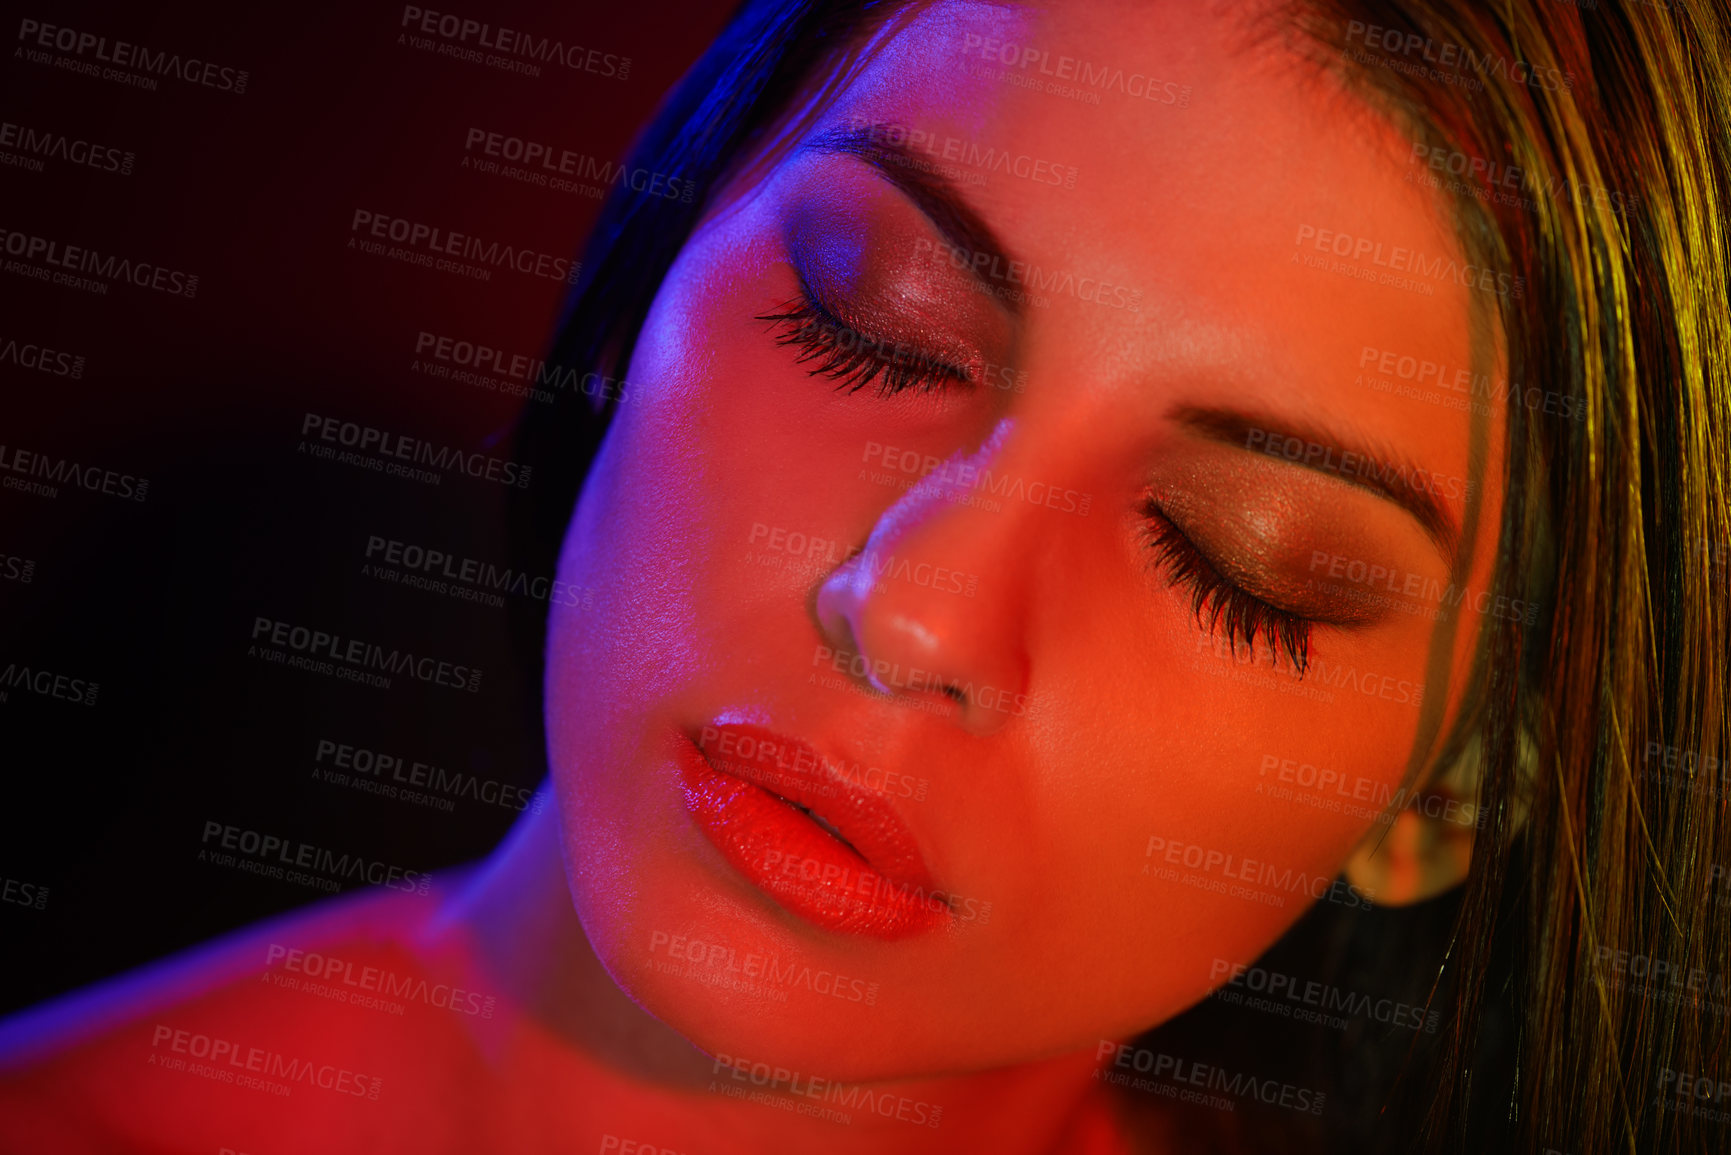 Buy stock photo Studio shot of a beautiful young woman with artistic lighting